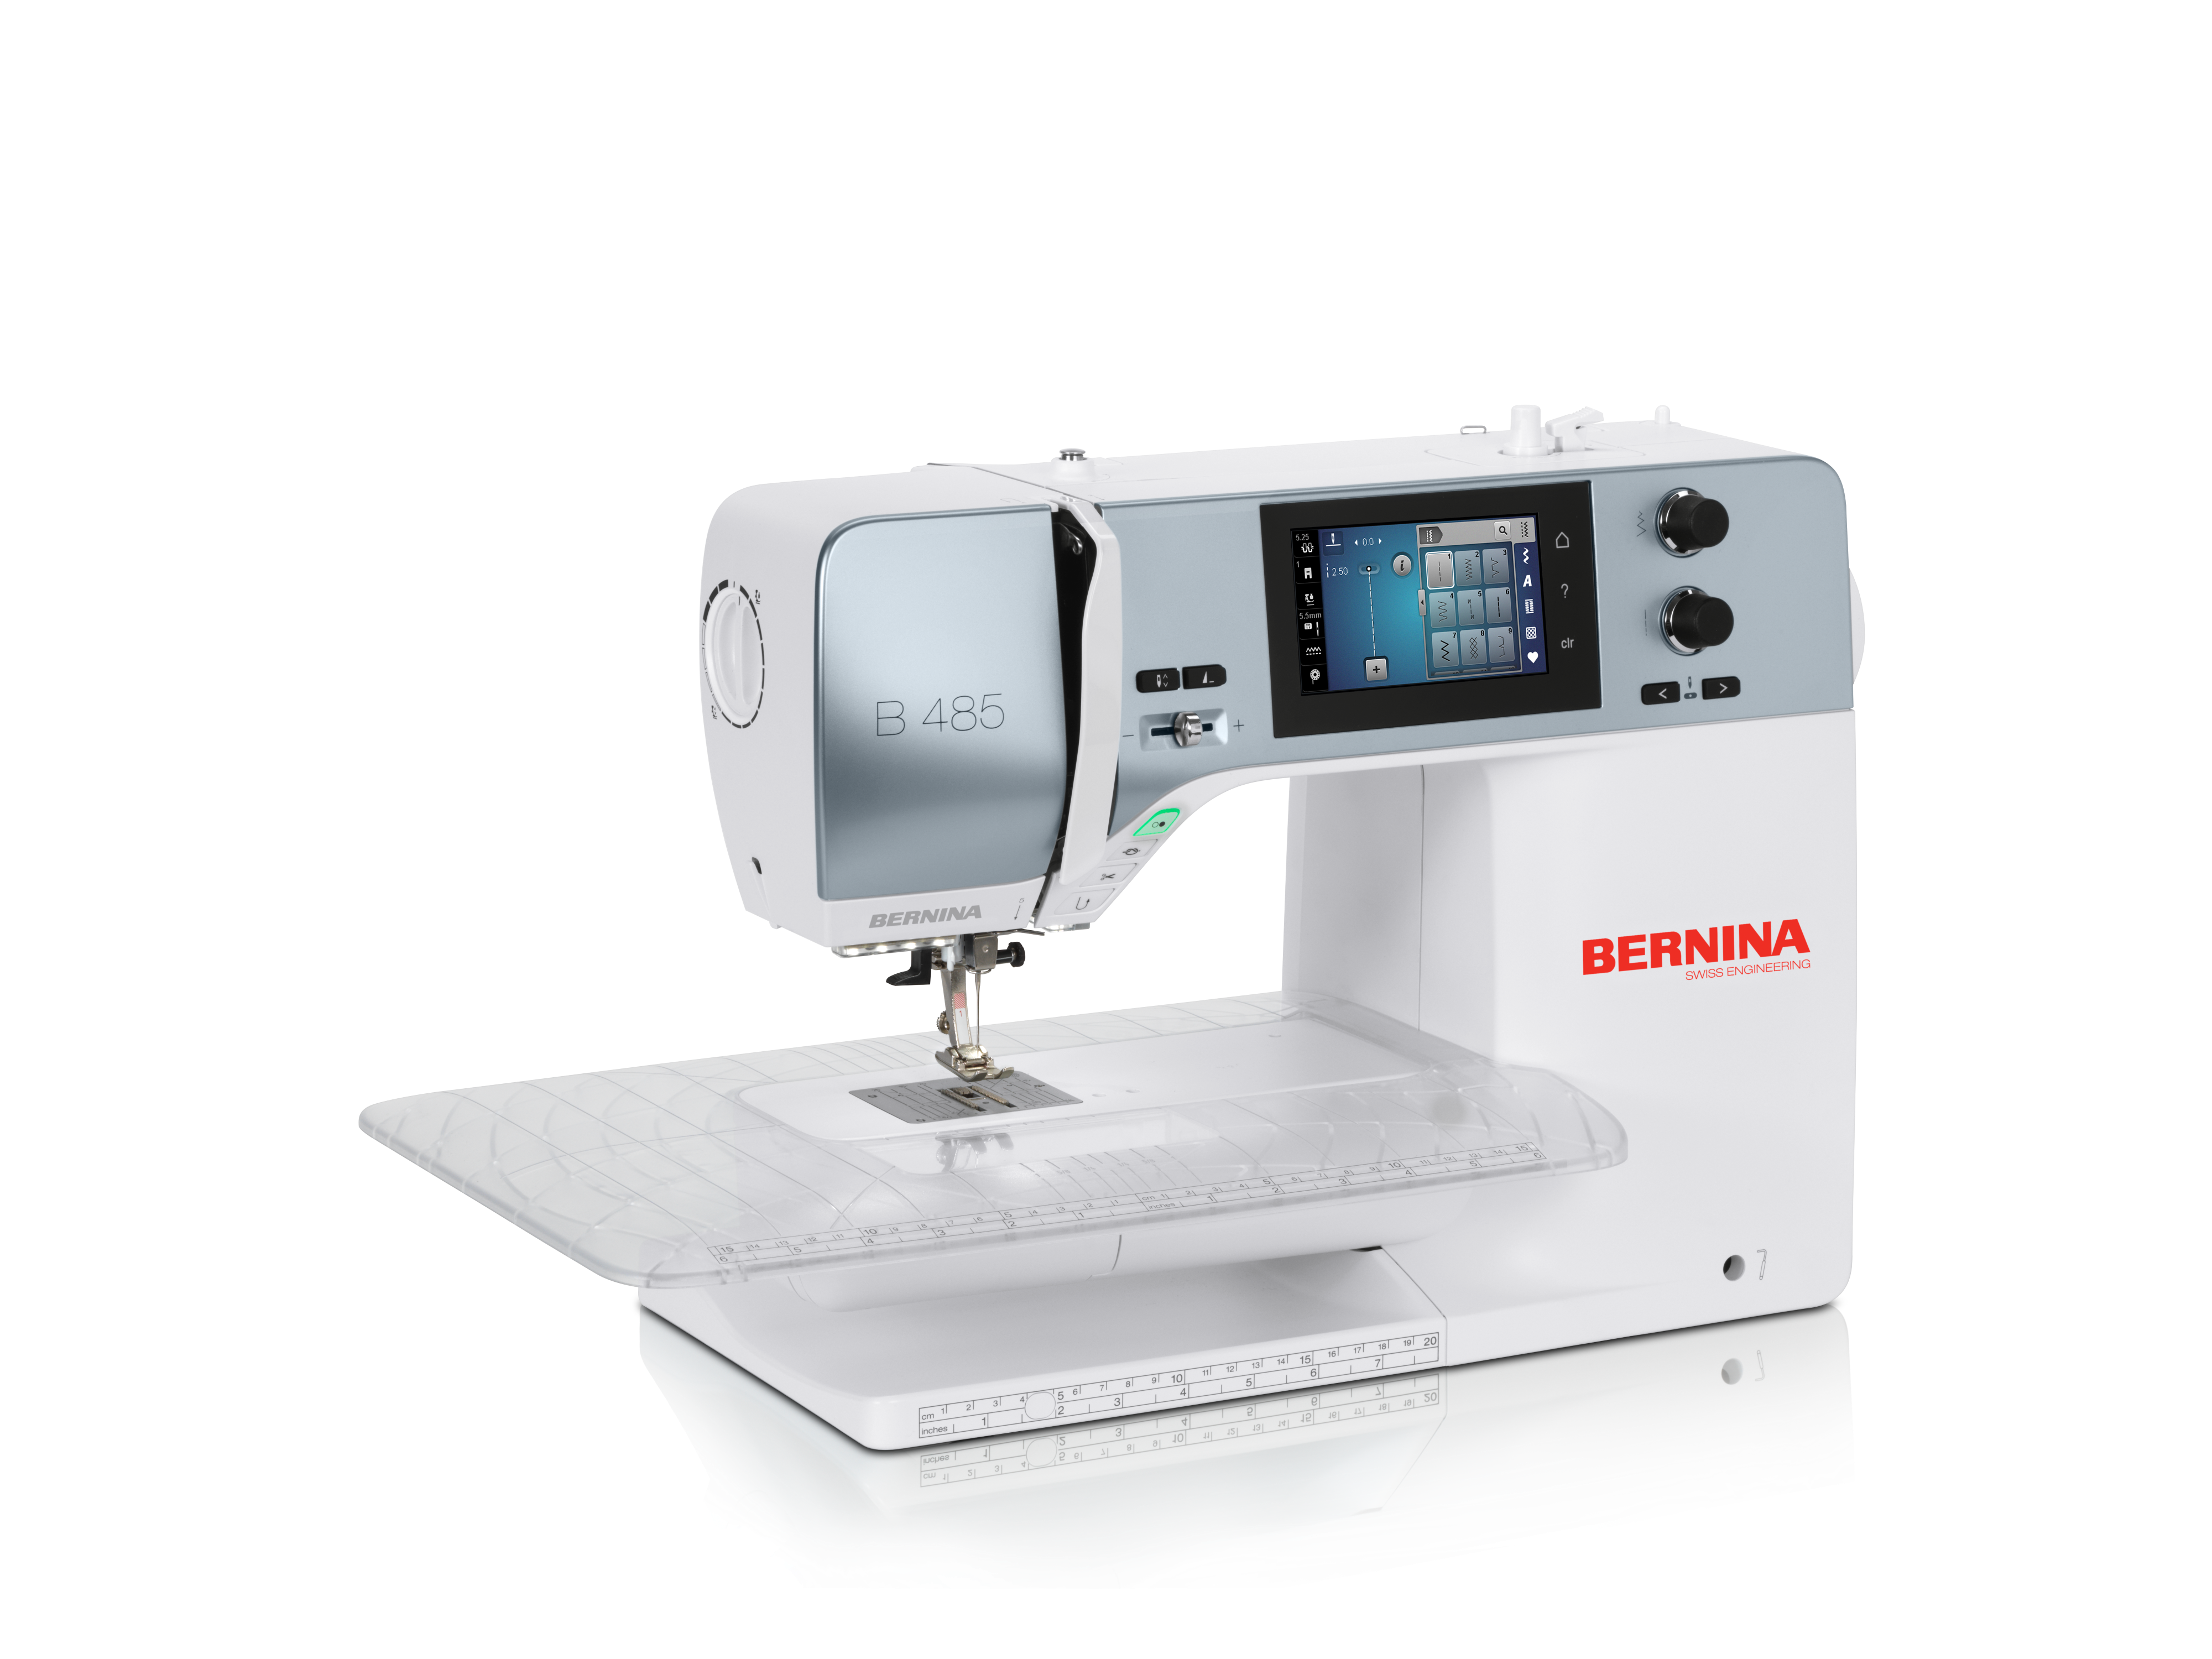 BERNINA 485 Sewing Machine for Sale at World Weidner